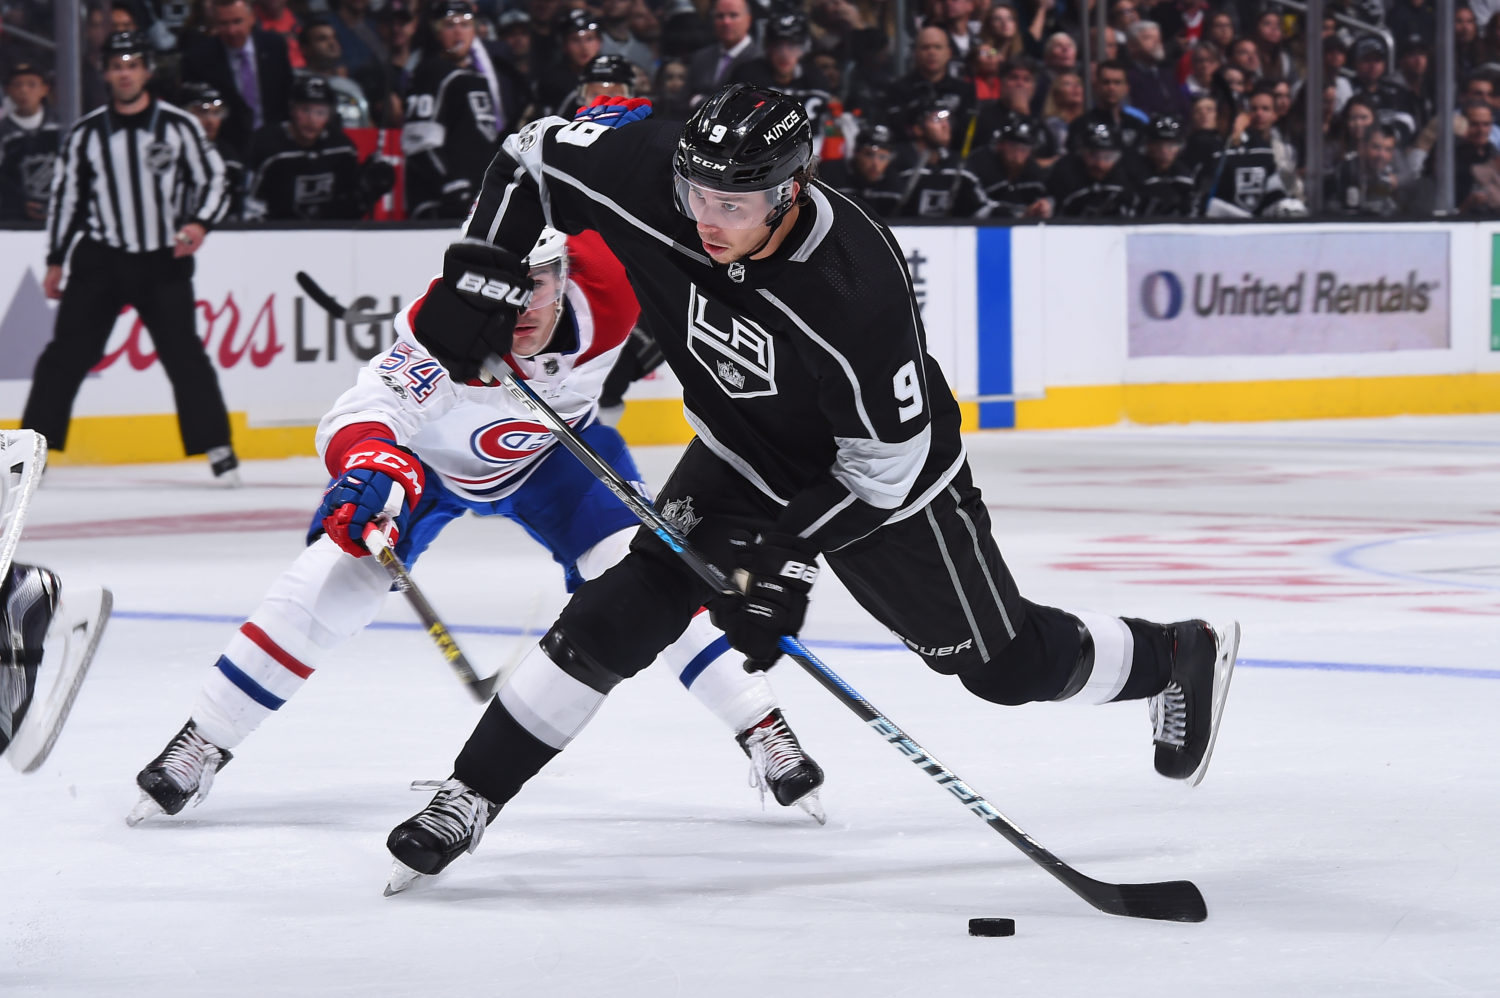 Adrian Kempe Hockey Stats and Profile at